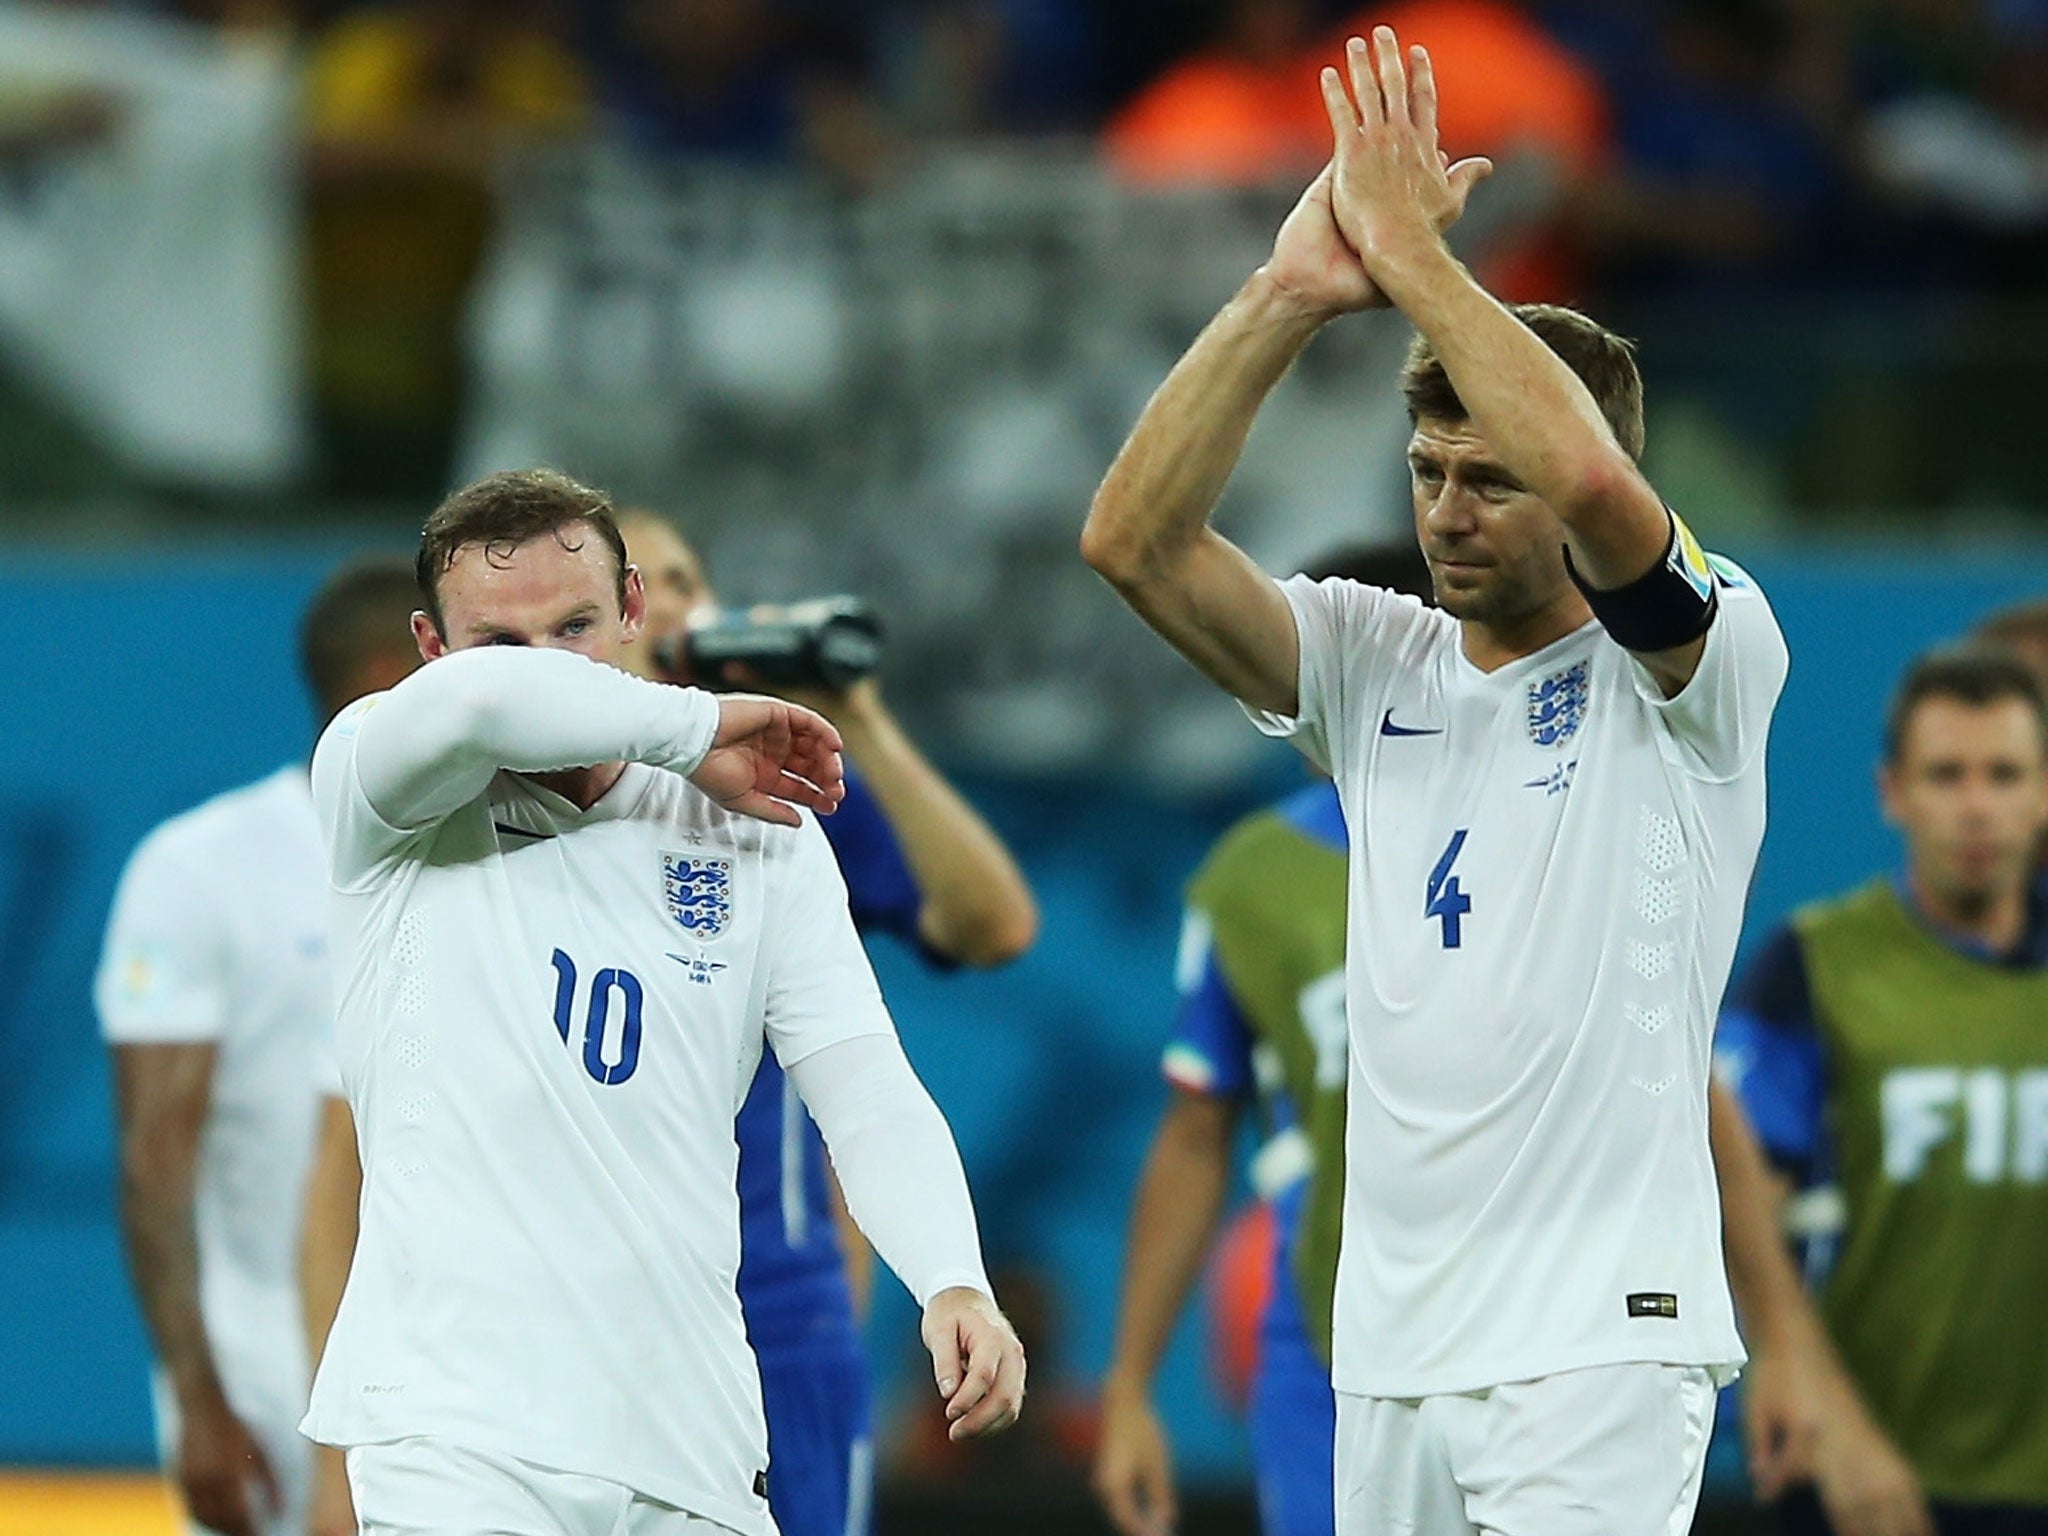 Steven Gerrard says England can be "proud" of their performance despite 2-1 defeat to Italy